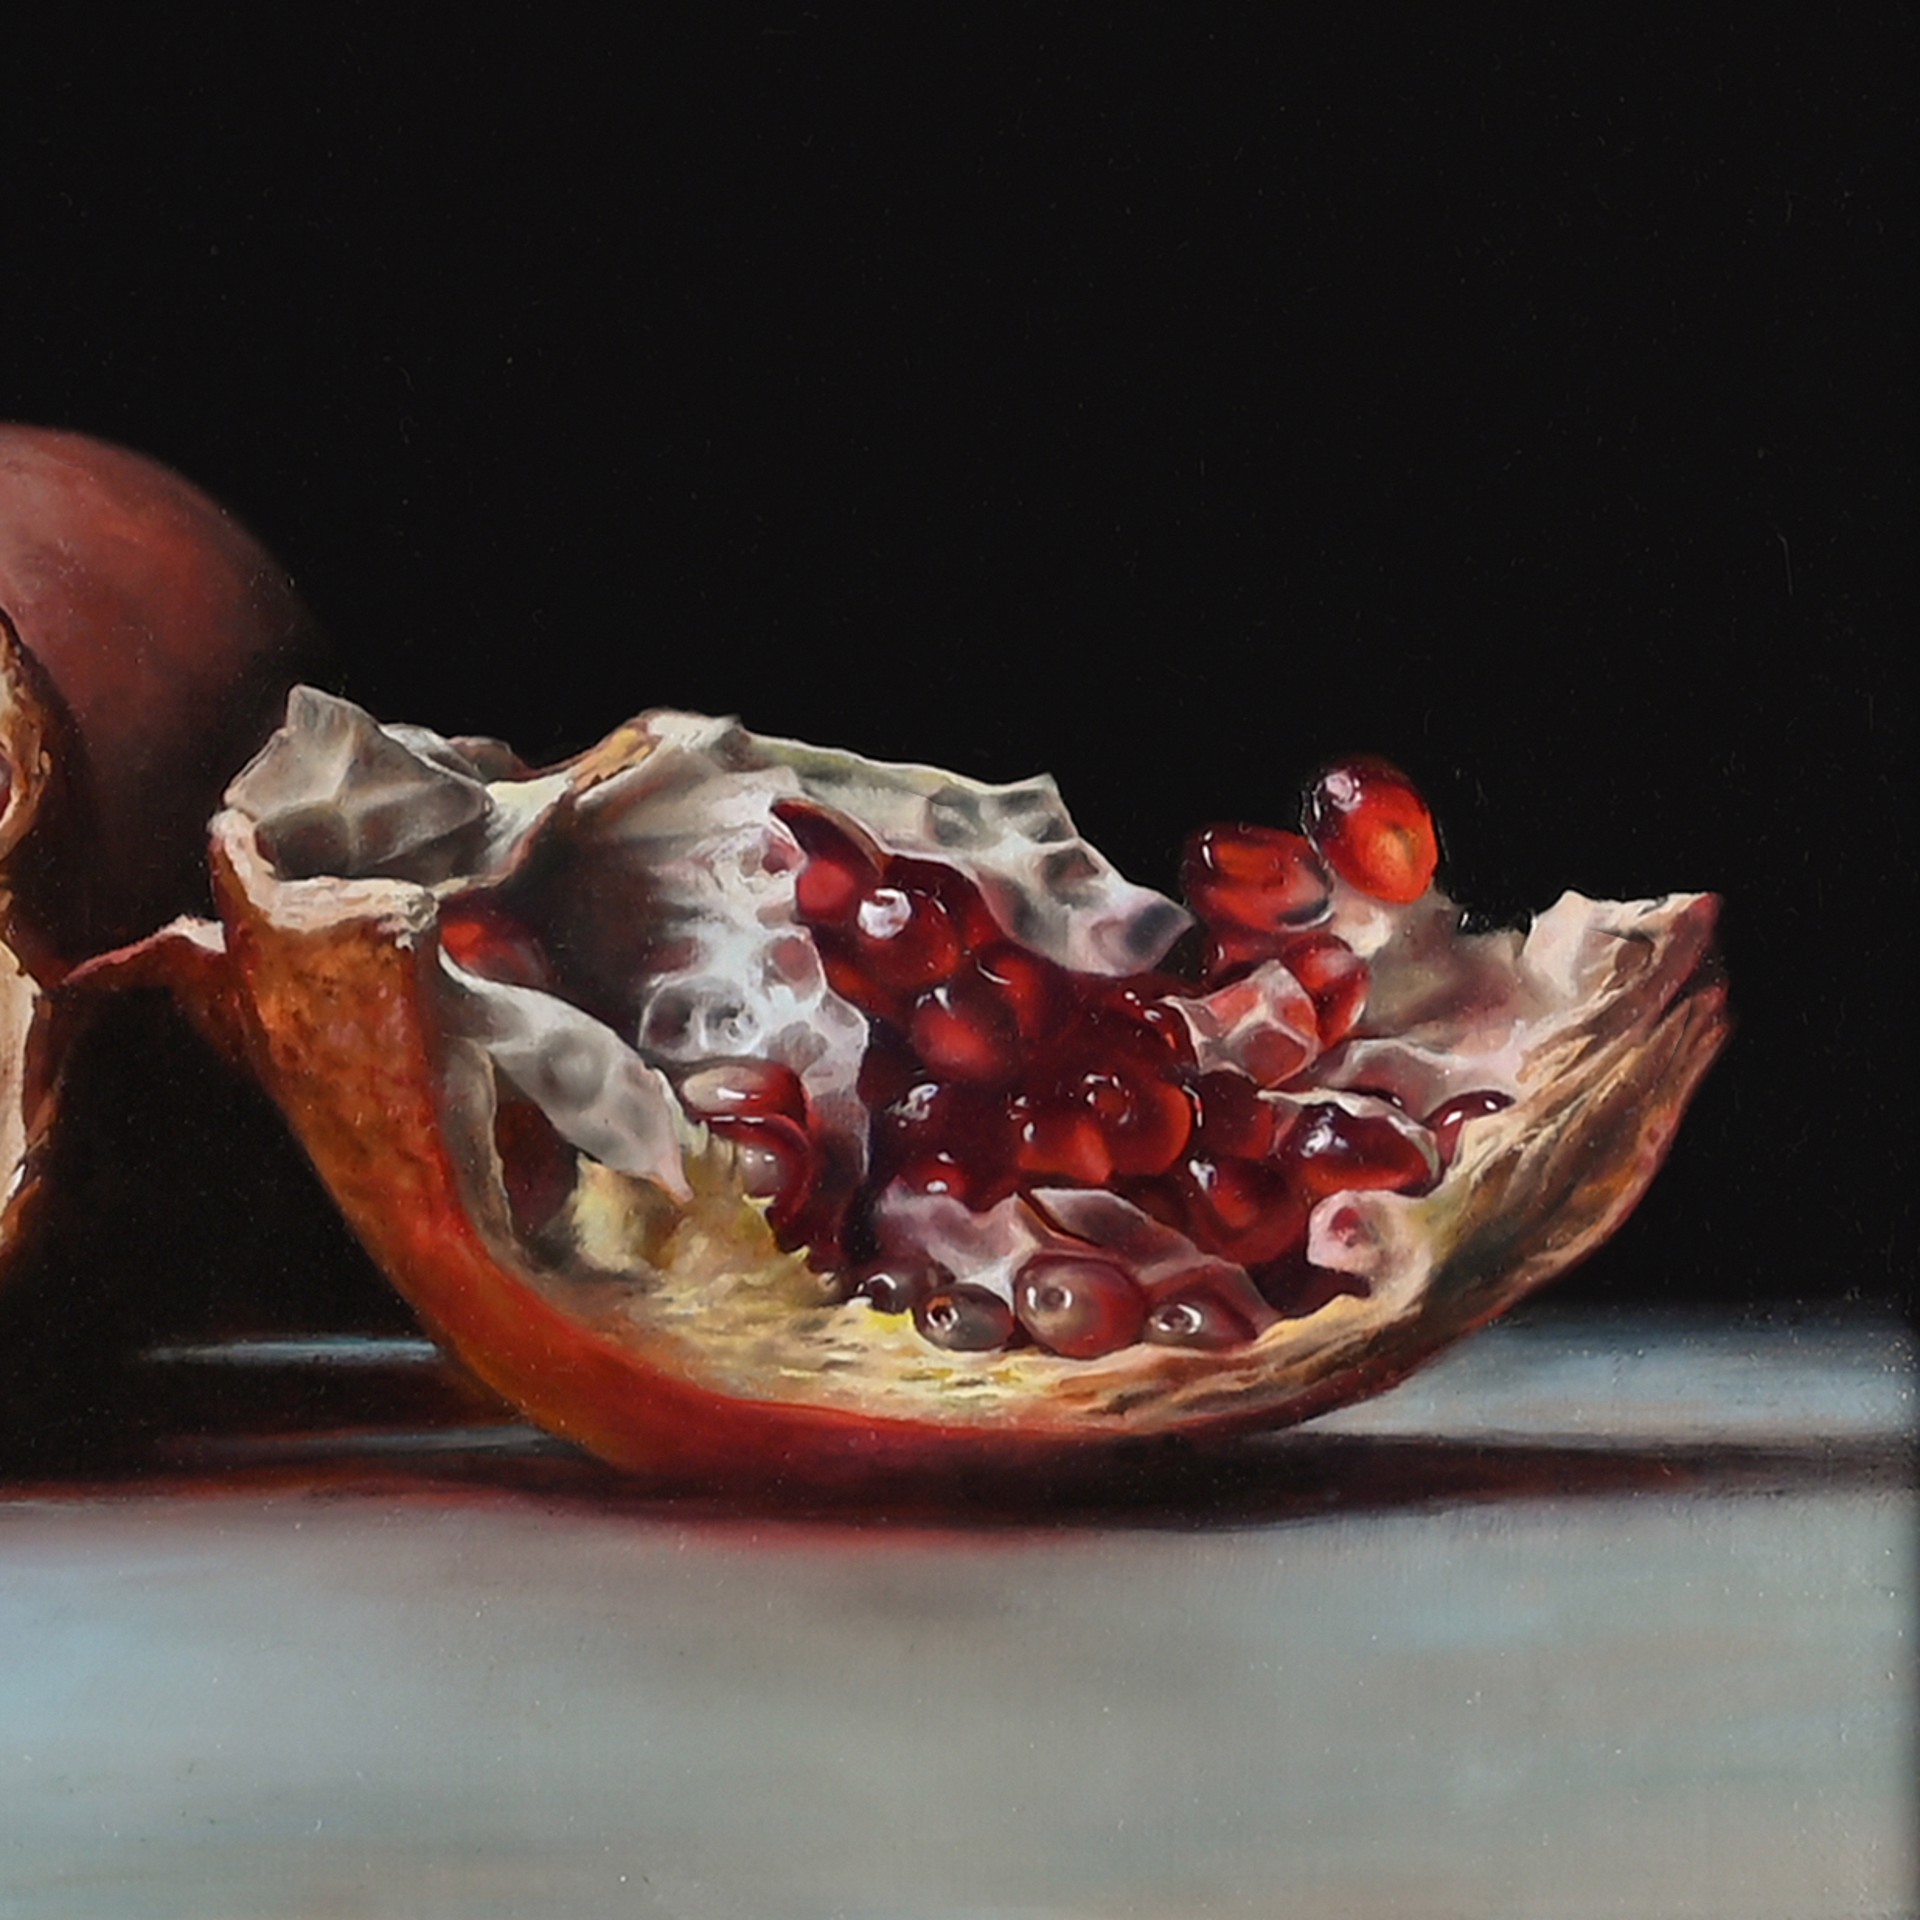 Photorealistic oil painting "Broken Hearts" by Victoria Novak, depicting several broken pomegranates on a white surface against a black background, showcasing the vibrant red arils and intricate textures.